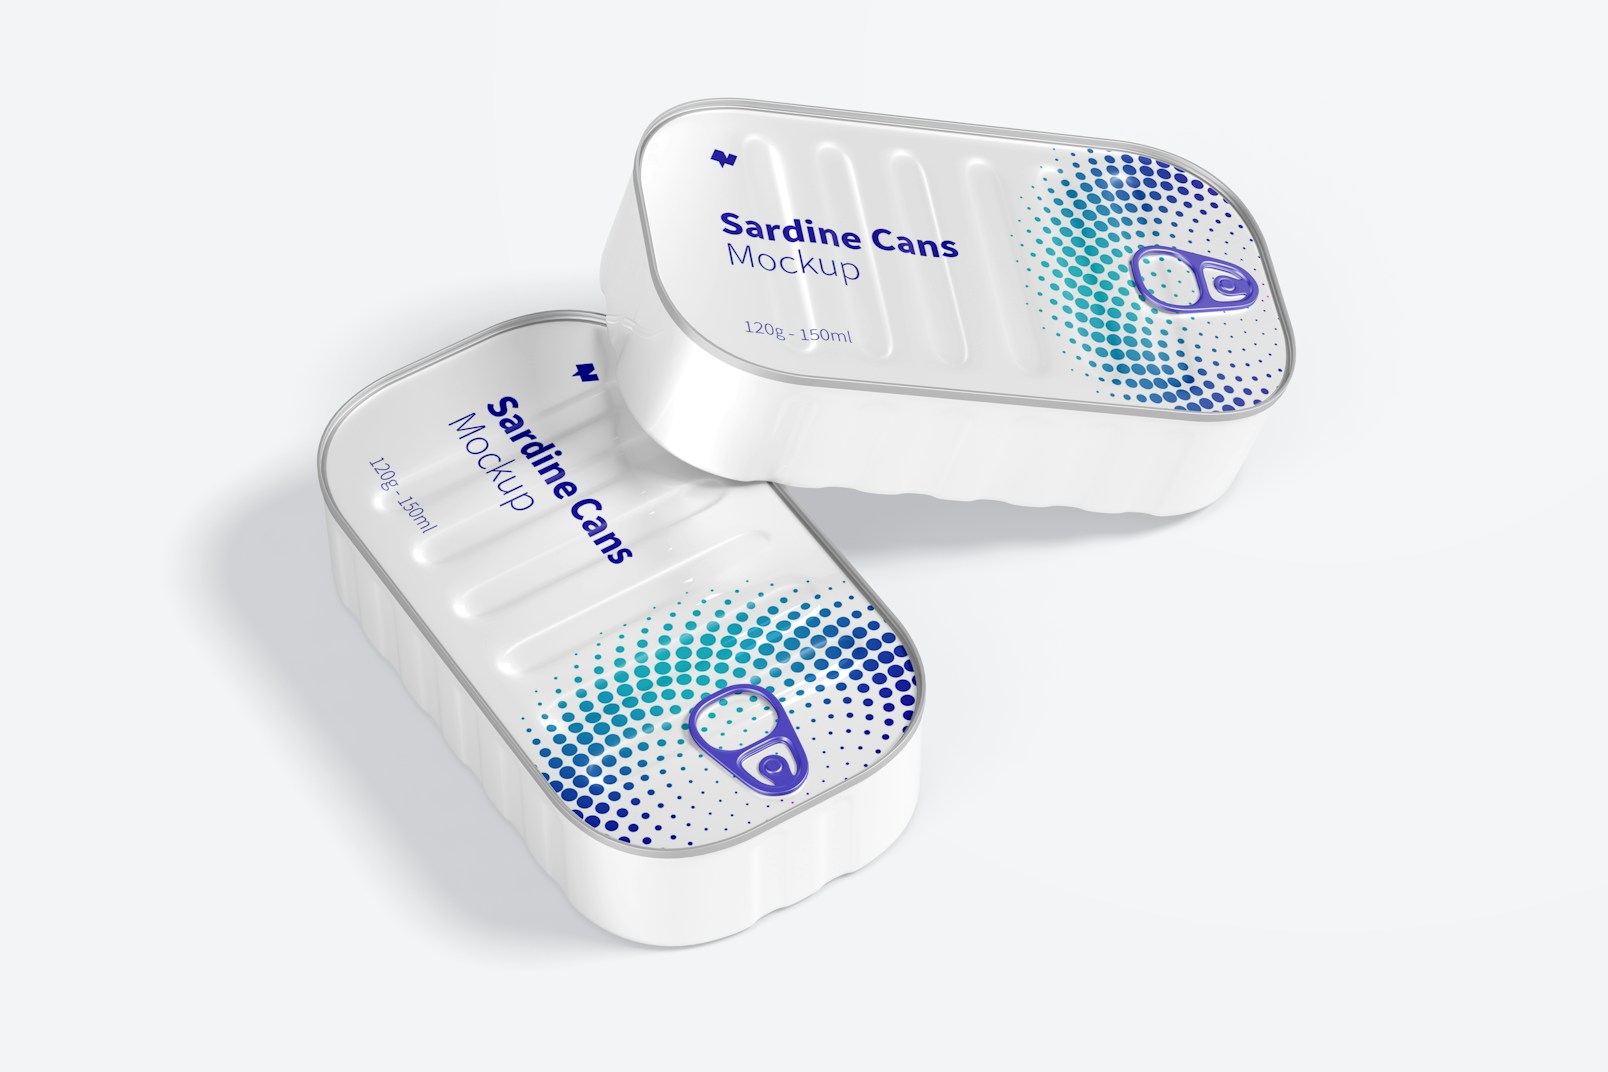 120g Sardine Cans Mockup, Top View